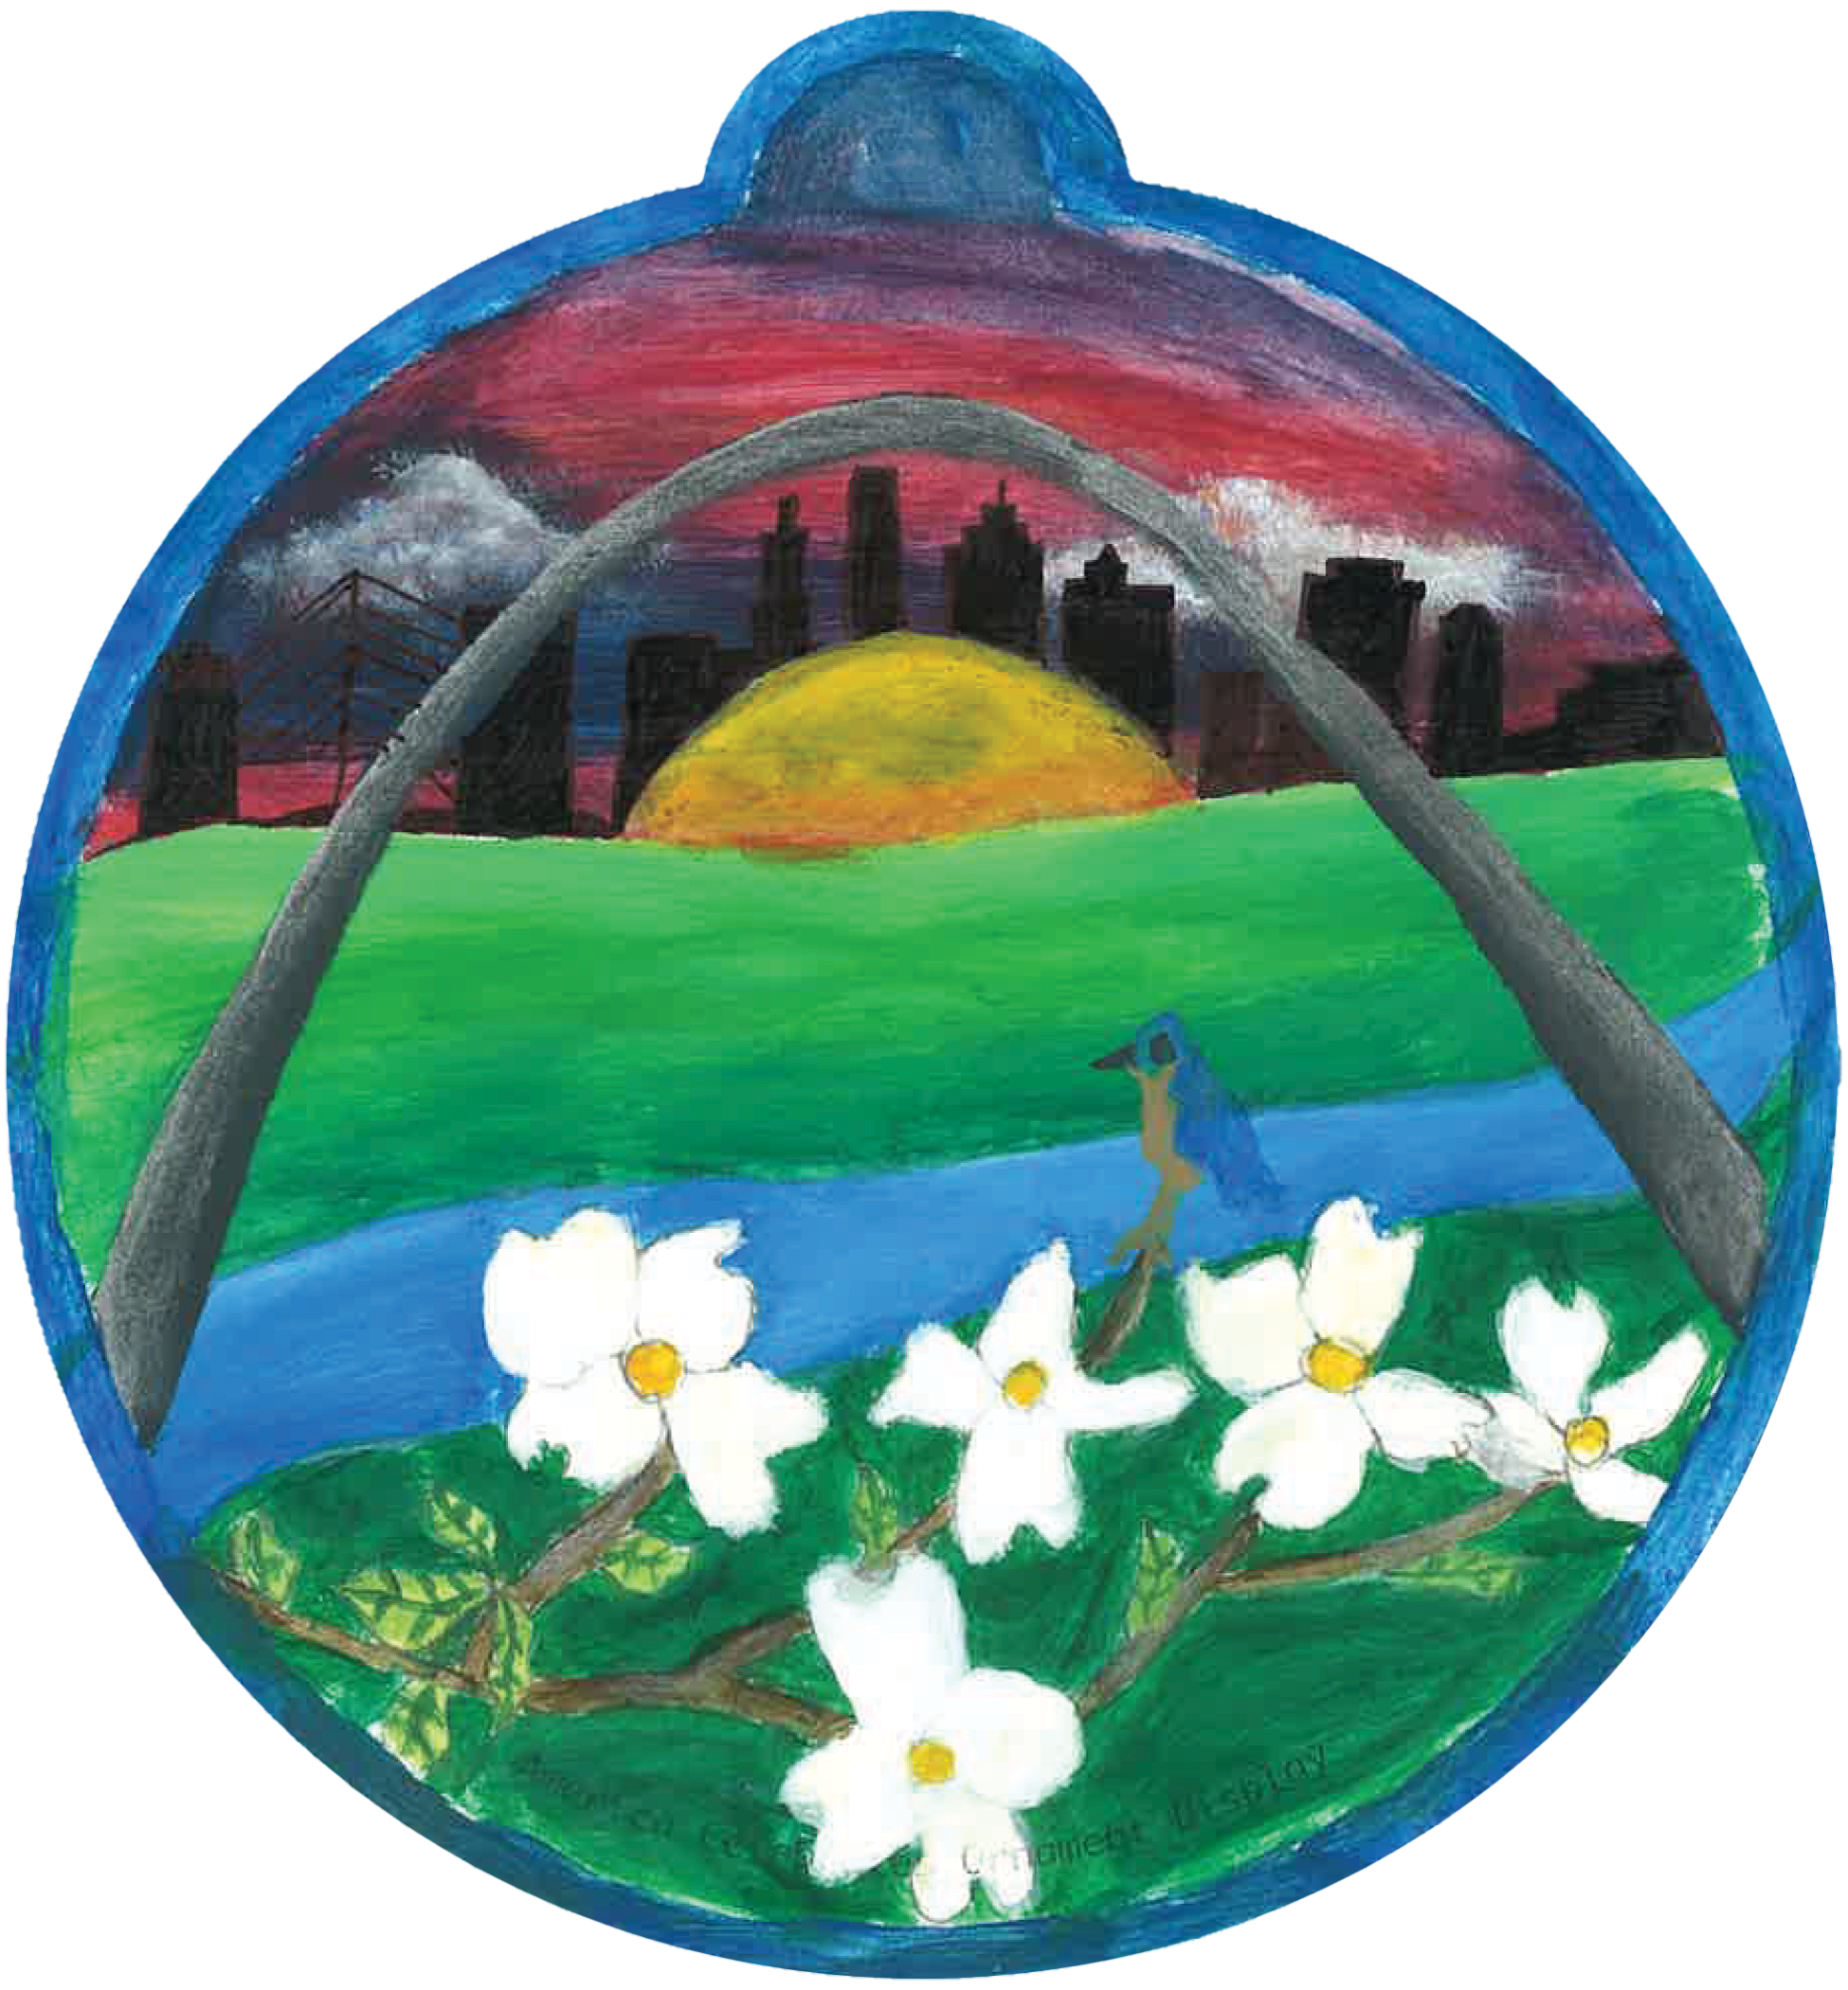 ornament depicting flowers blooming, the St. Louis arch, a sunrise, and a city skyline